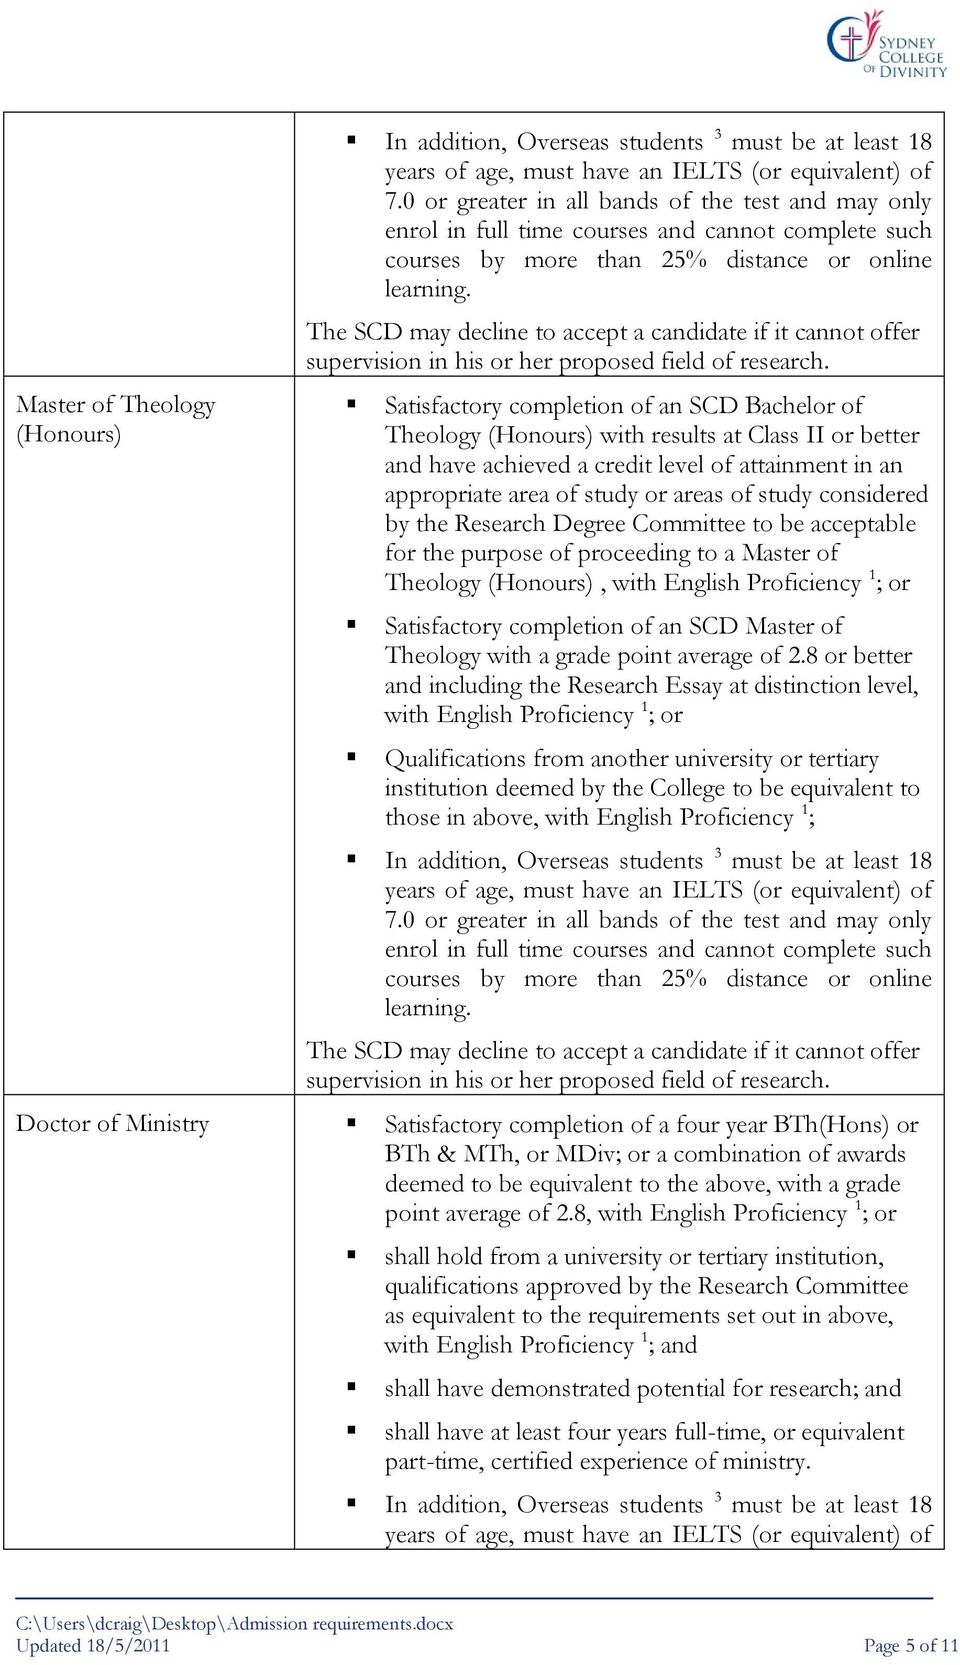 considered by the Research Degree Committee to be acceptable for the purpose of proceeding to a Master of Theology (Honours), with English Proficiency 1 ; or Satisfactory completion of an SCD Master